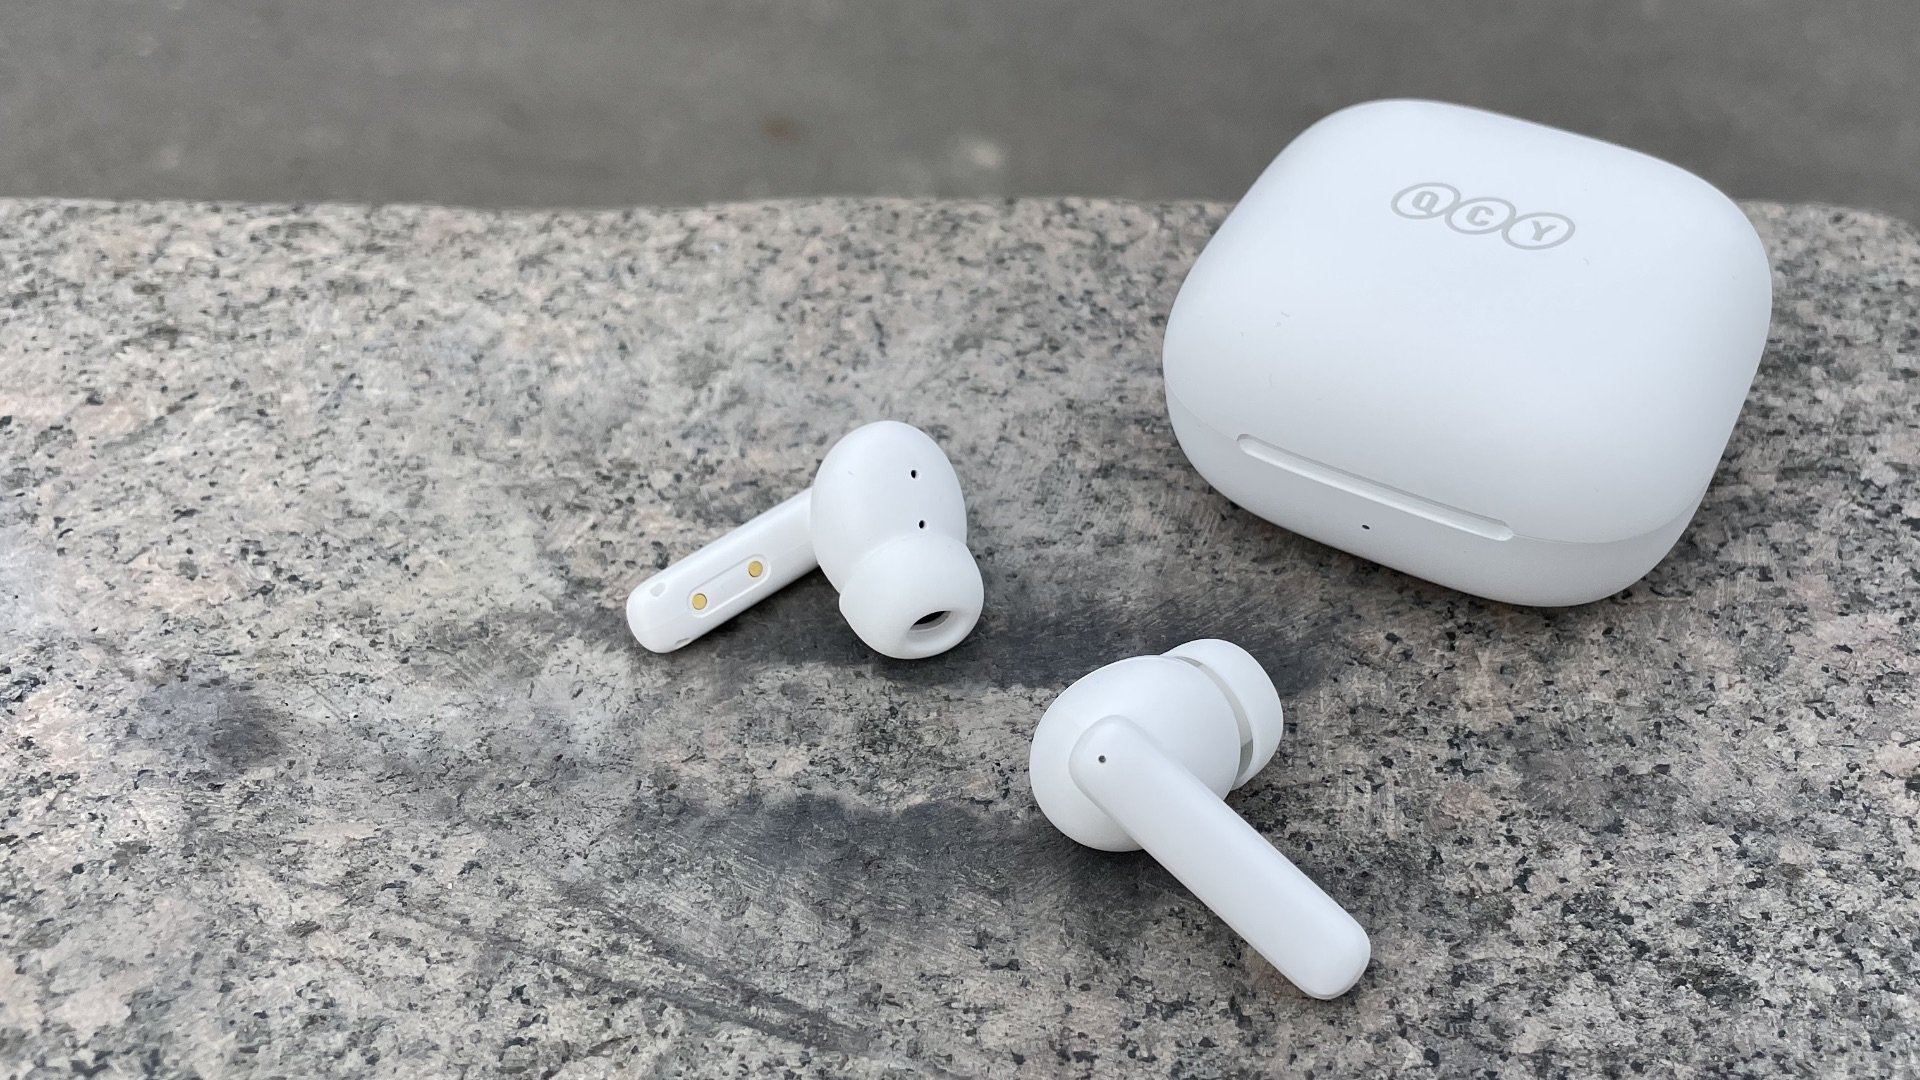 QCY T13 ANC TWS Earbuds